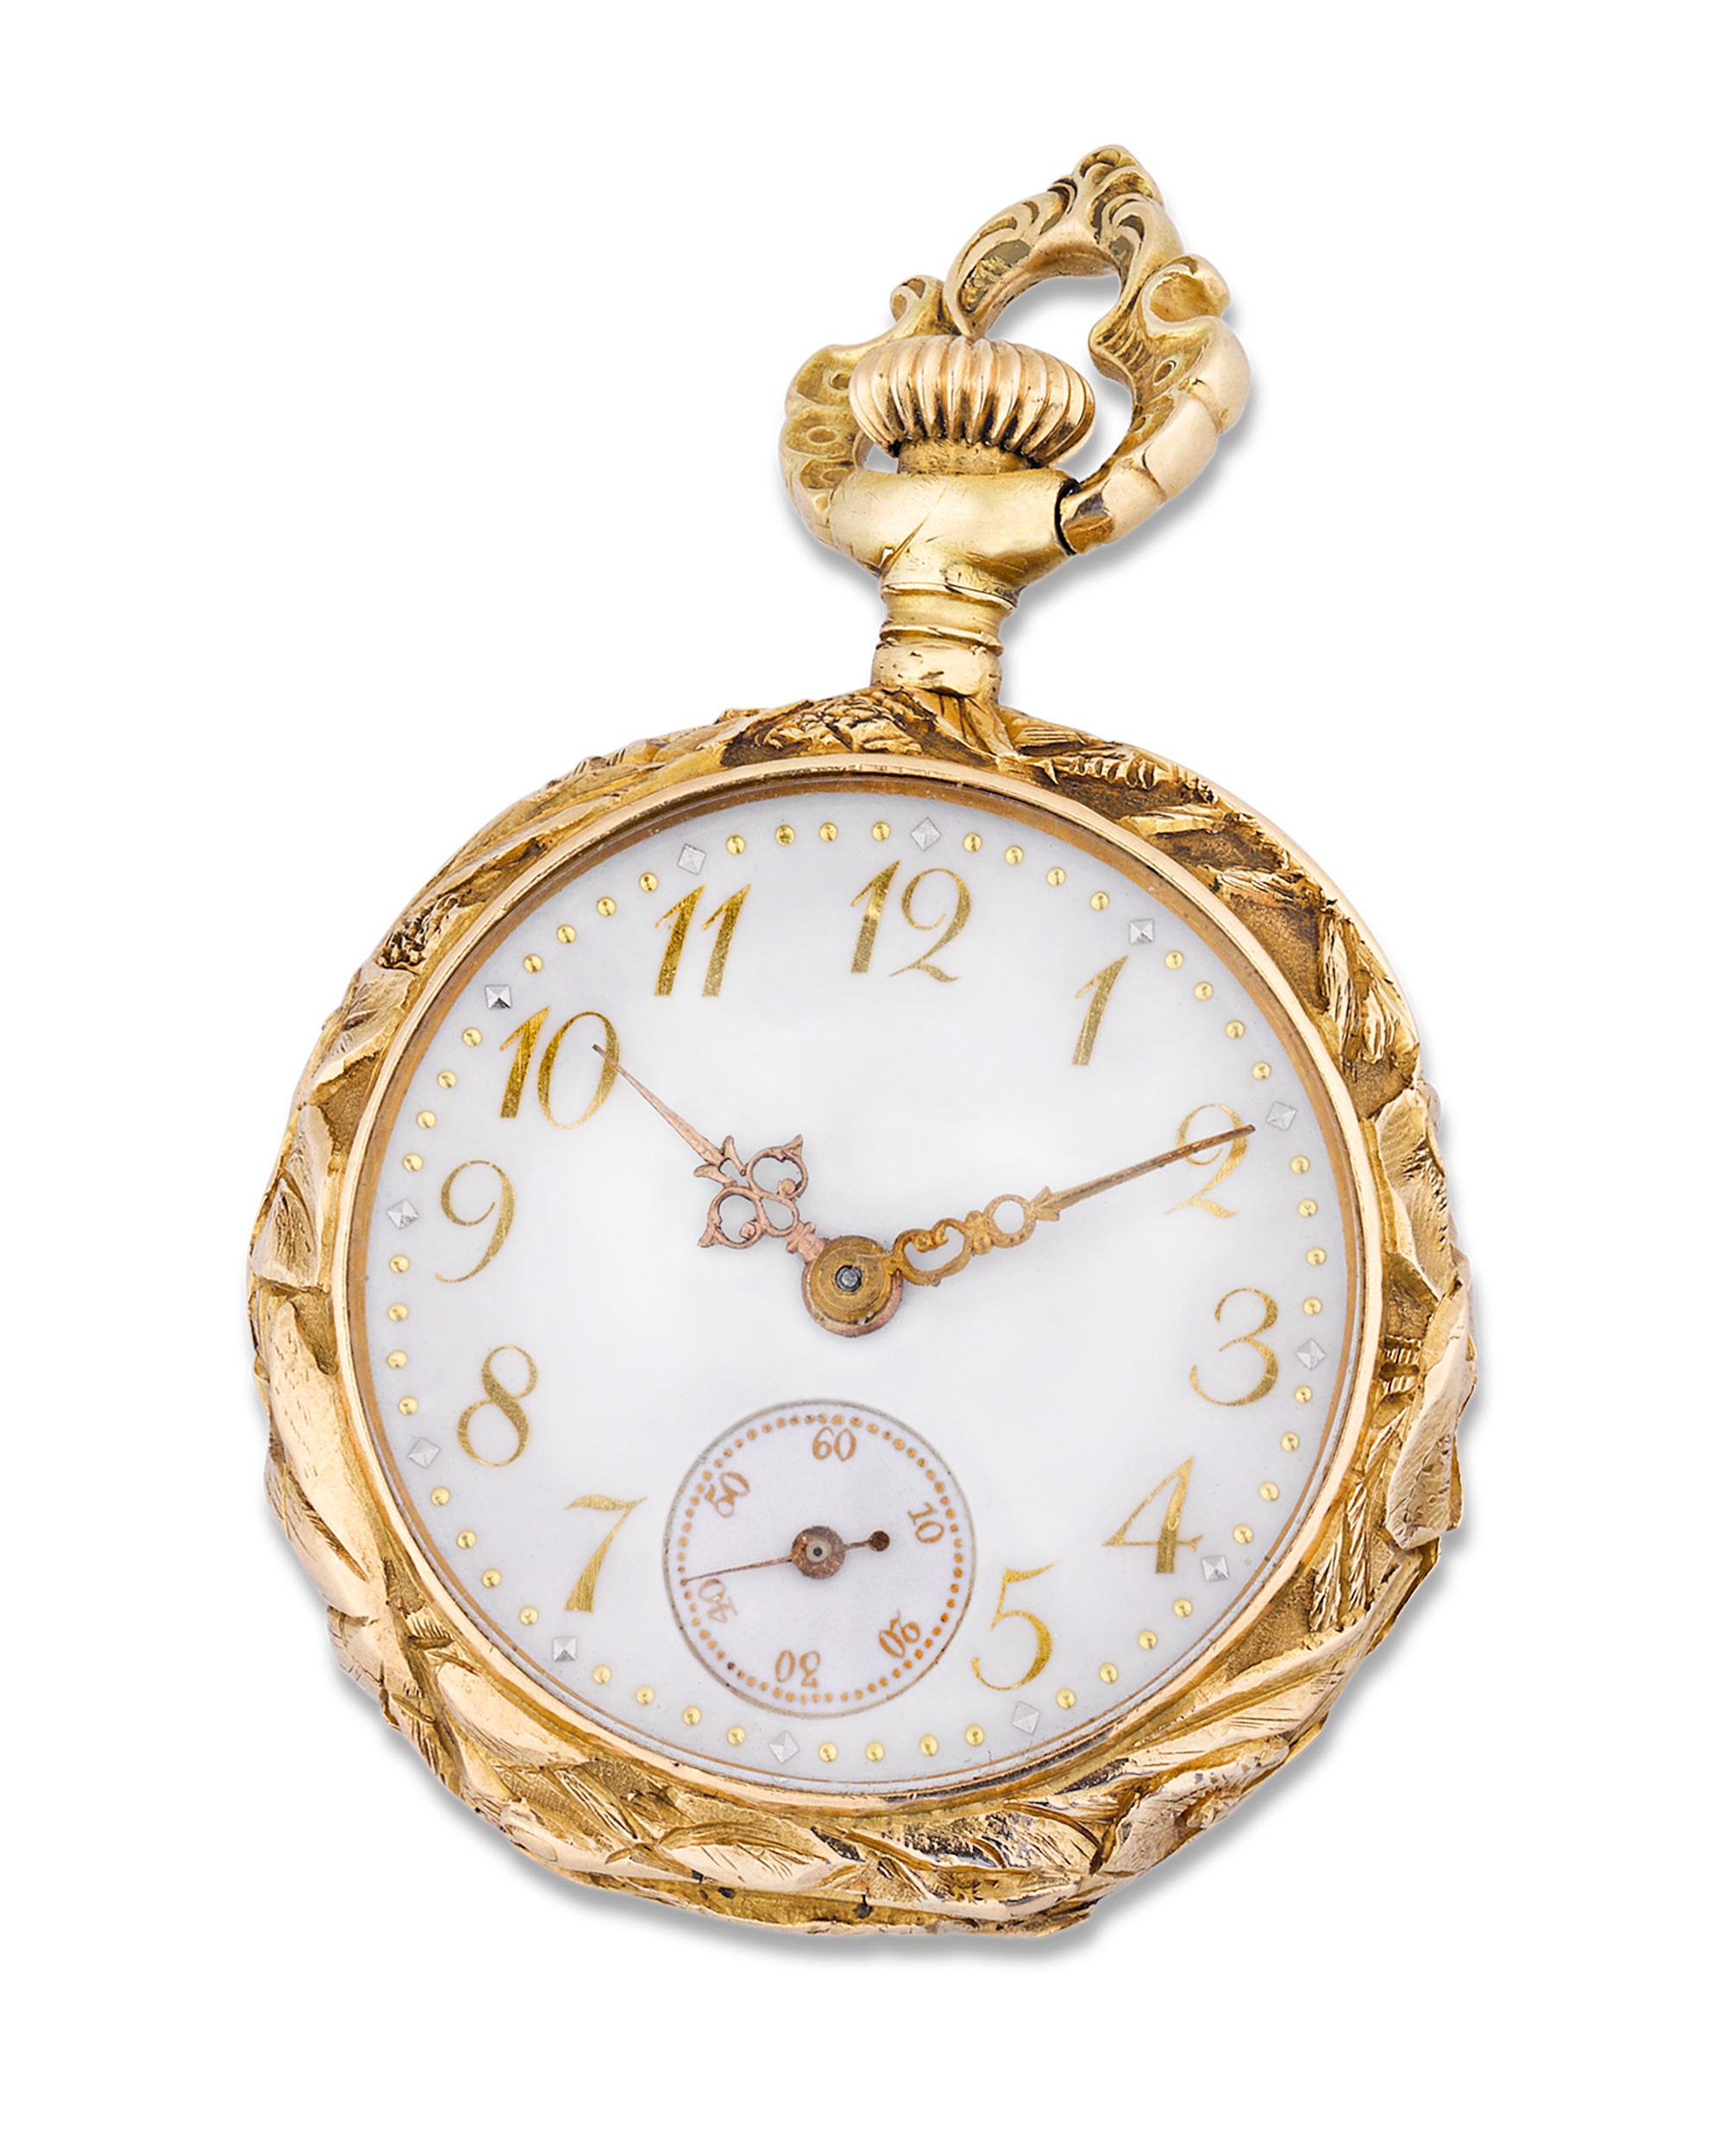 The highly respected E. Jaccard Jewelry Co. of St. Louis created this masterfully crafted lapel watch. The hand-wrought case is made of 18K yellow gold and features two hinged segments, the first of which showcases the masterfully pierced and